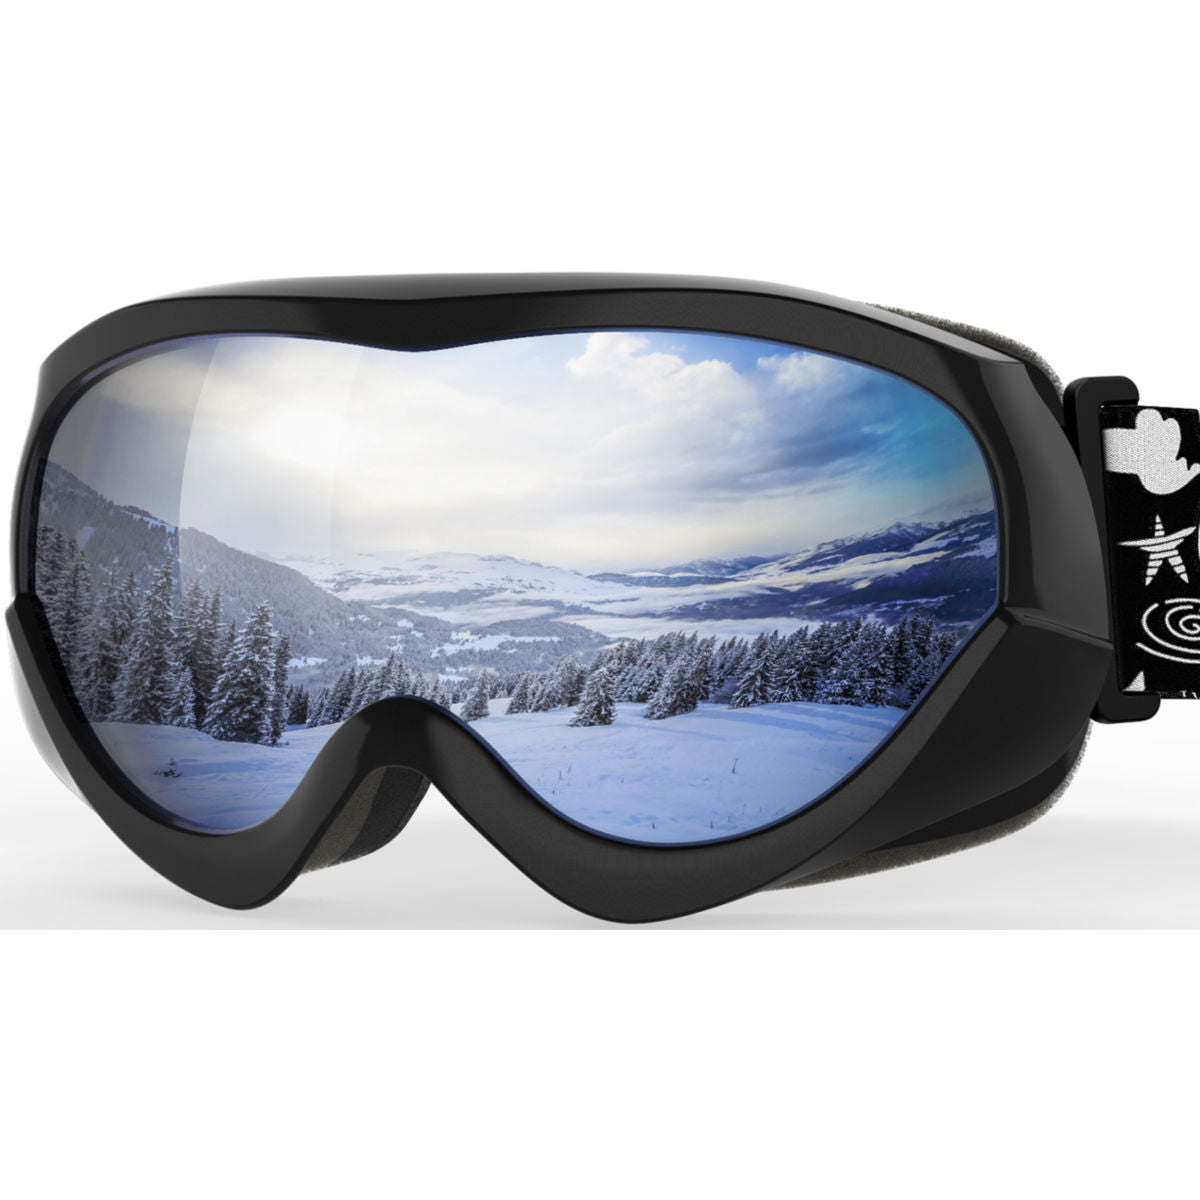 OutdoorMaster Kids Ski Goggles - Helmet Compatible Snow Goggles for Boys & Girls with 100% UV Protection (Black Frame + VLT 10% Grey Lens with Re